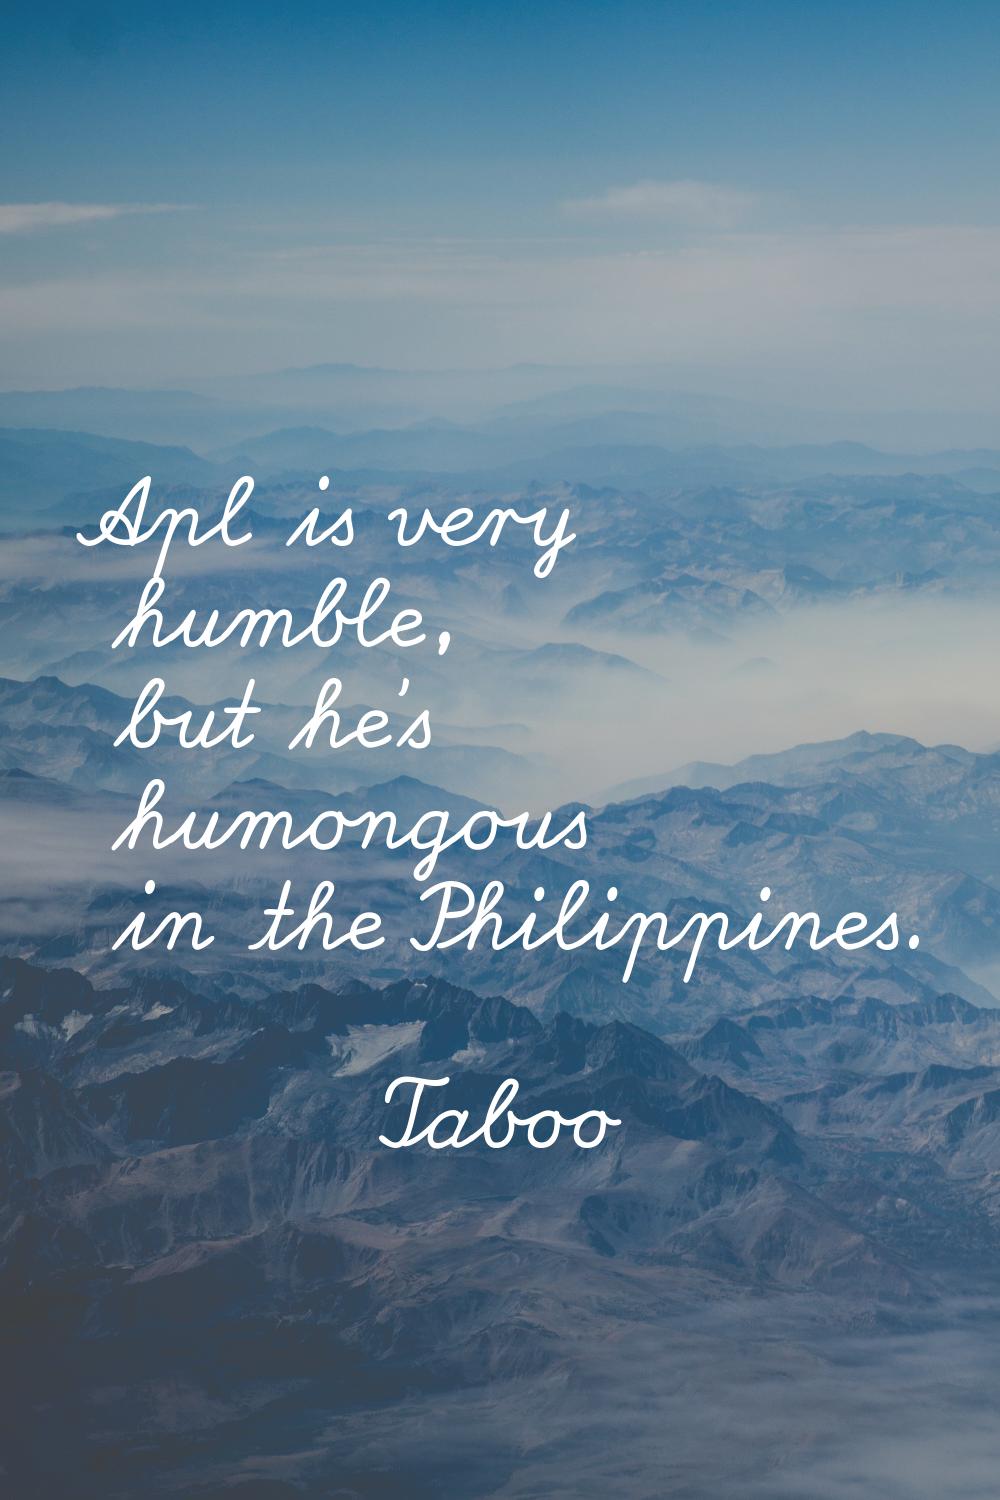 Apl is very humble, but he's humongous in the Philippines.